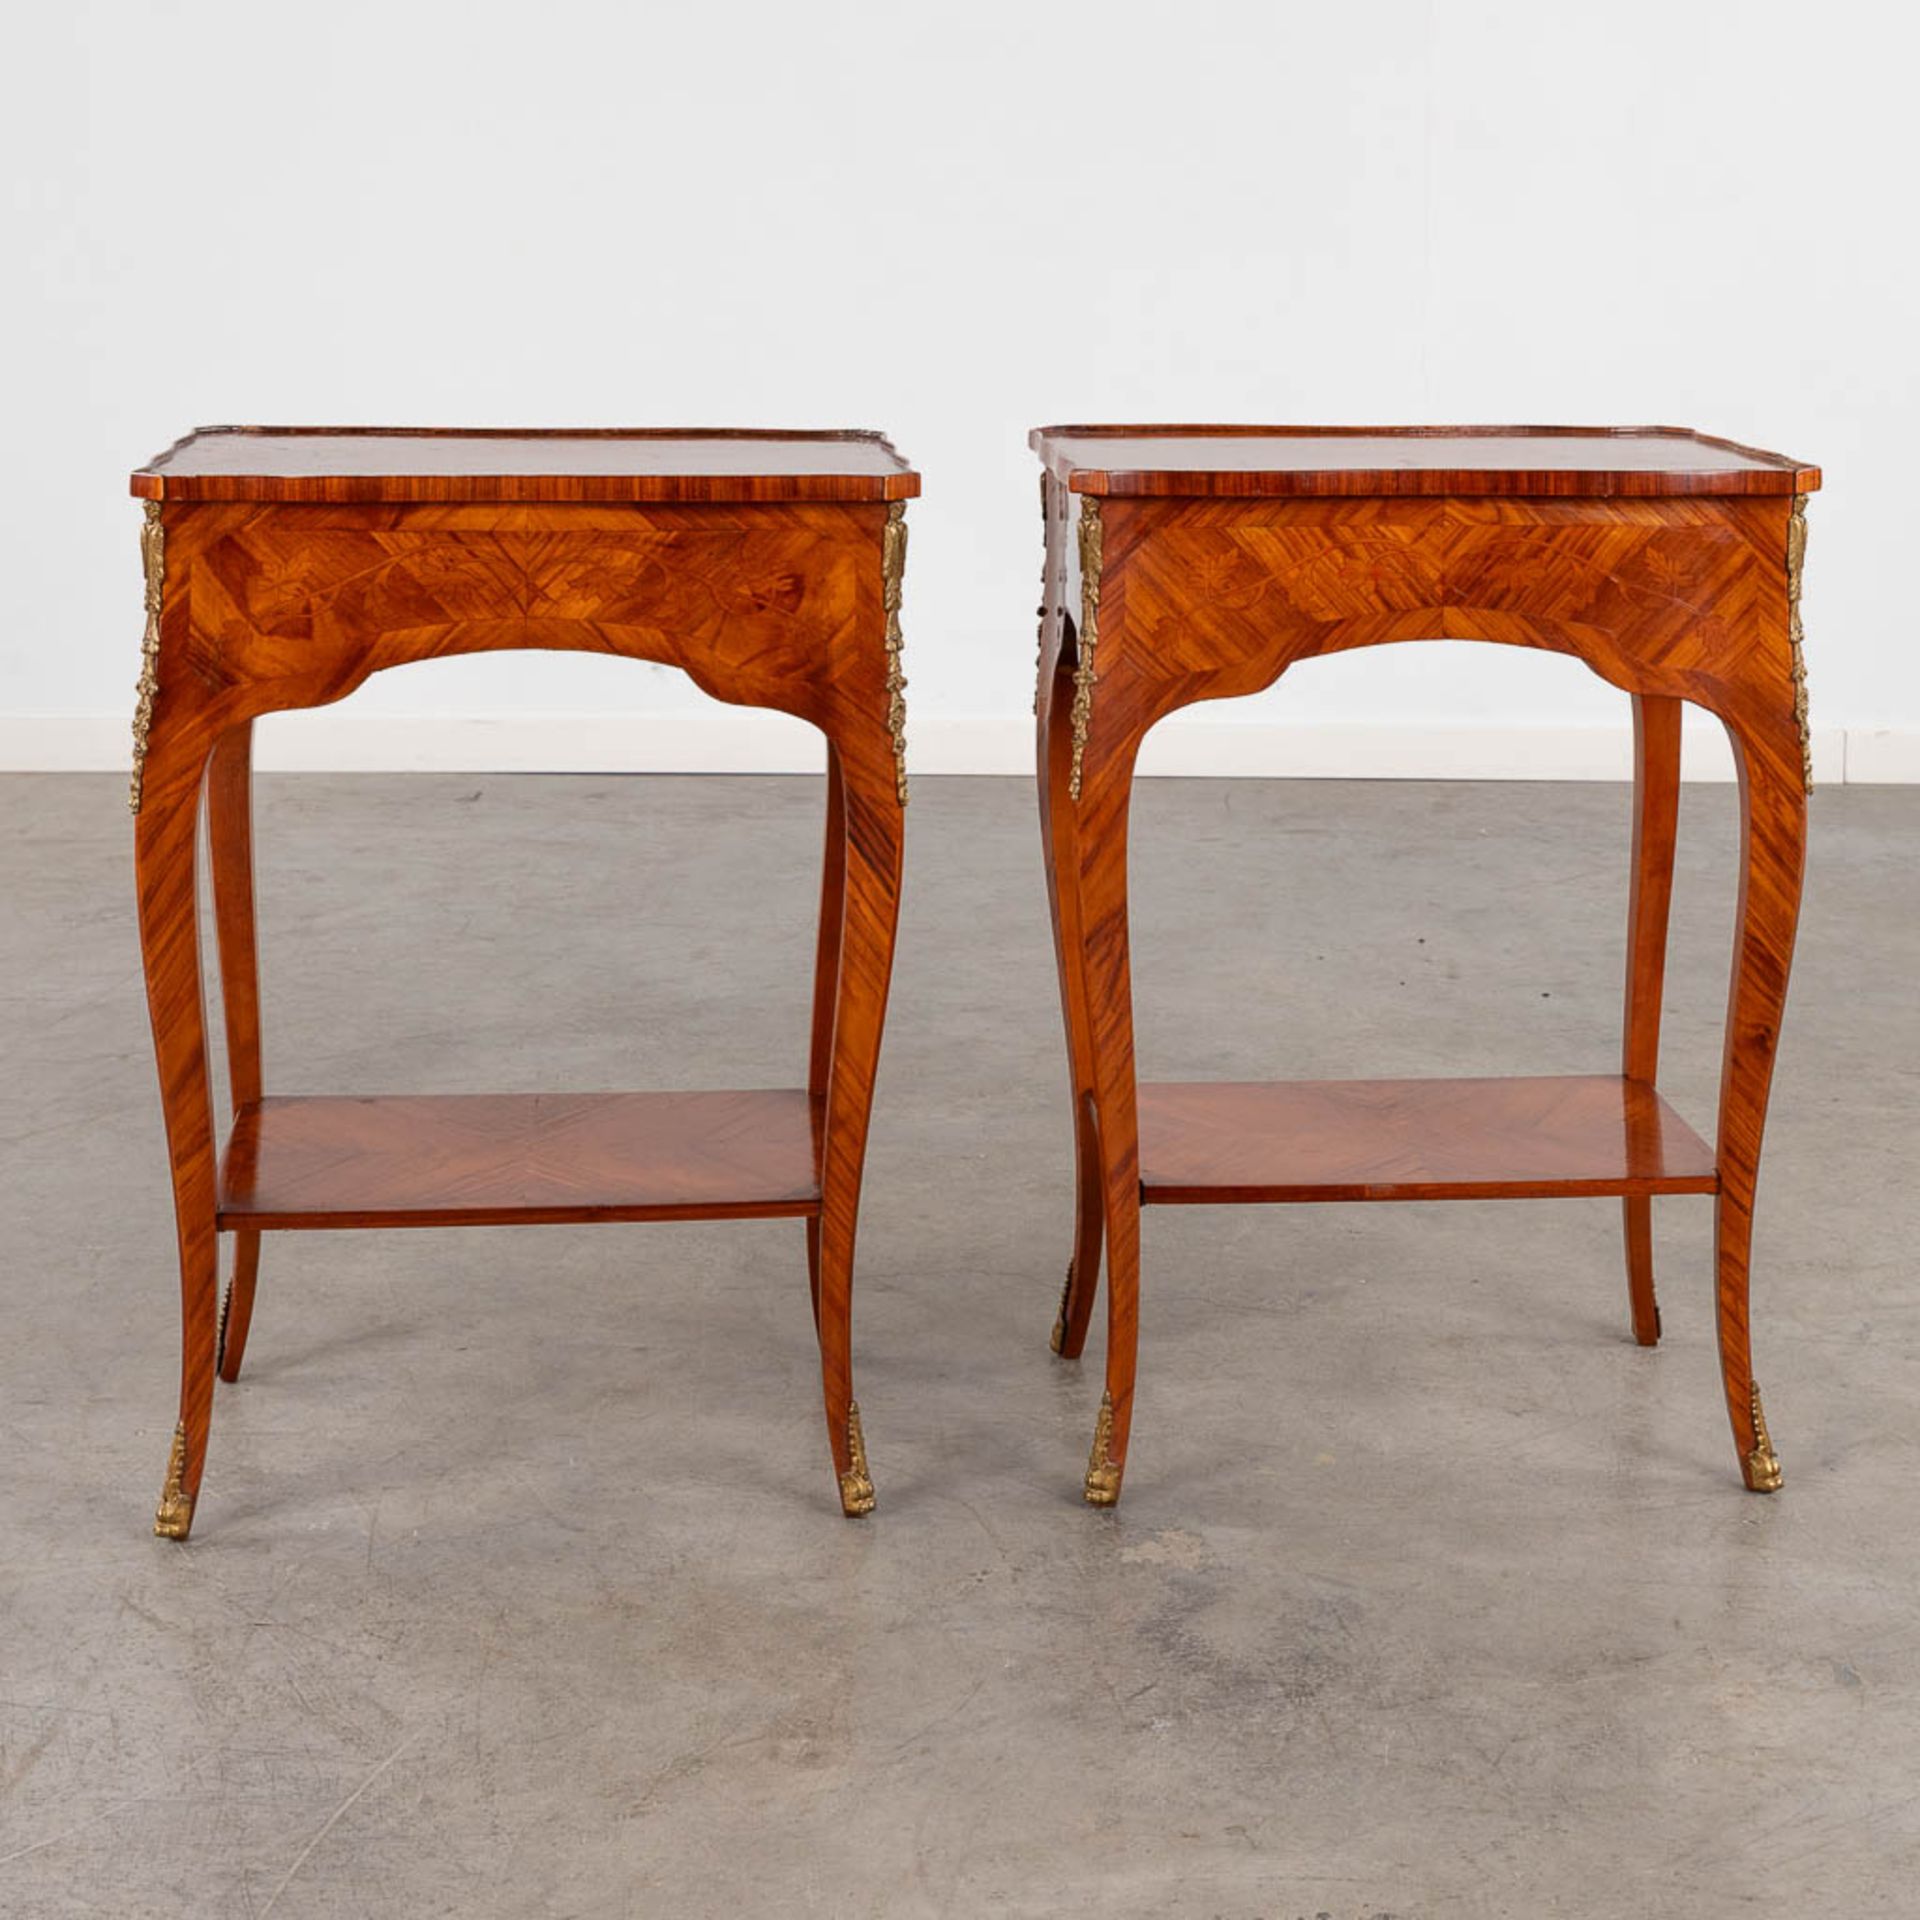 A pair of two-tier side tables with a drawer, wood with marquetry inlay. 20th C. (D:30 x W:45 x H:63 - Image 6 of 14